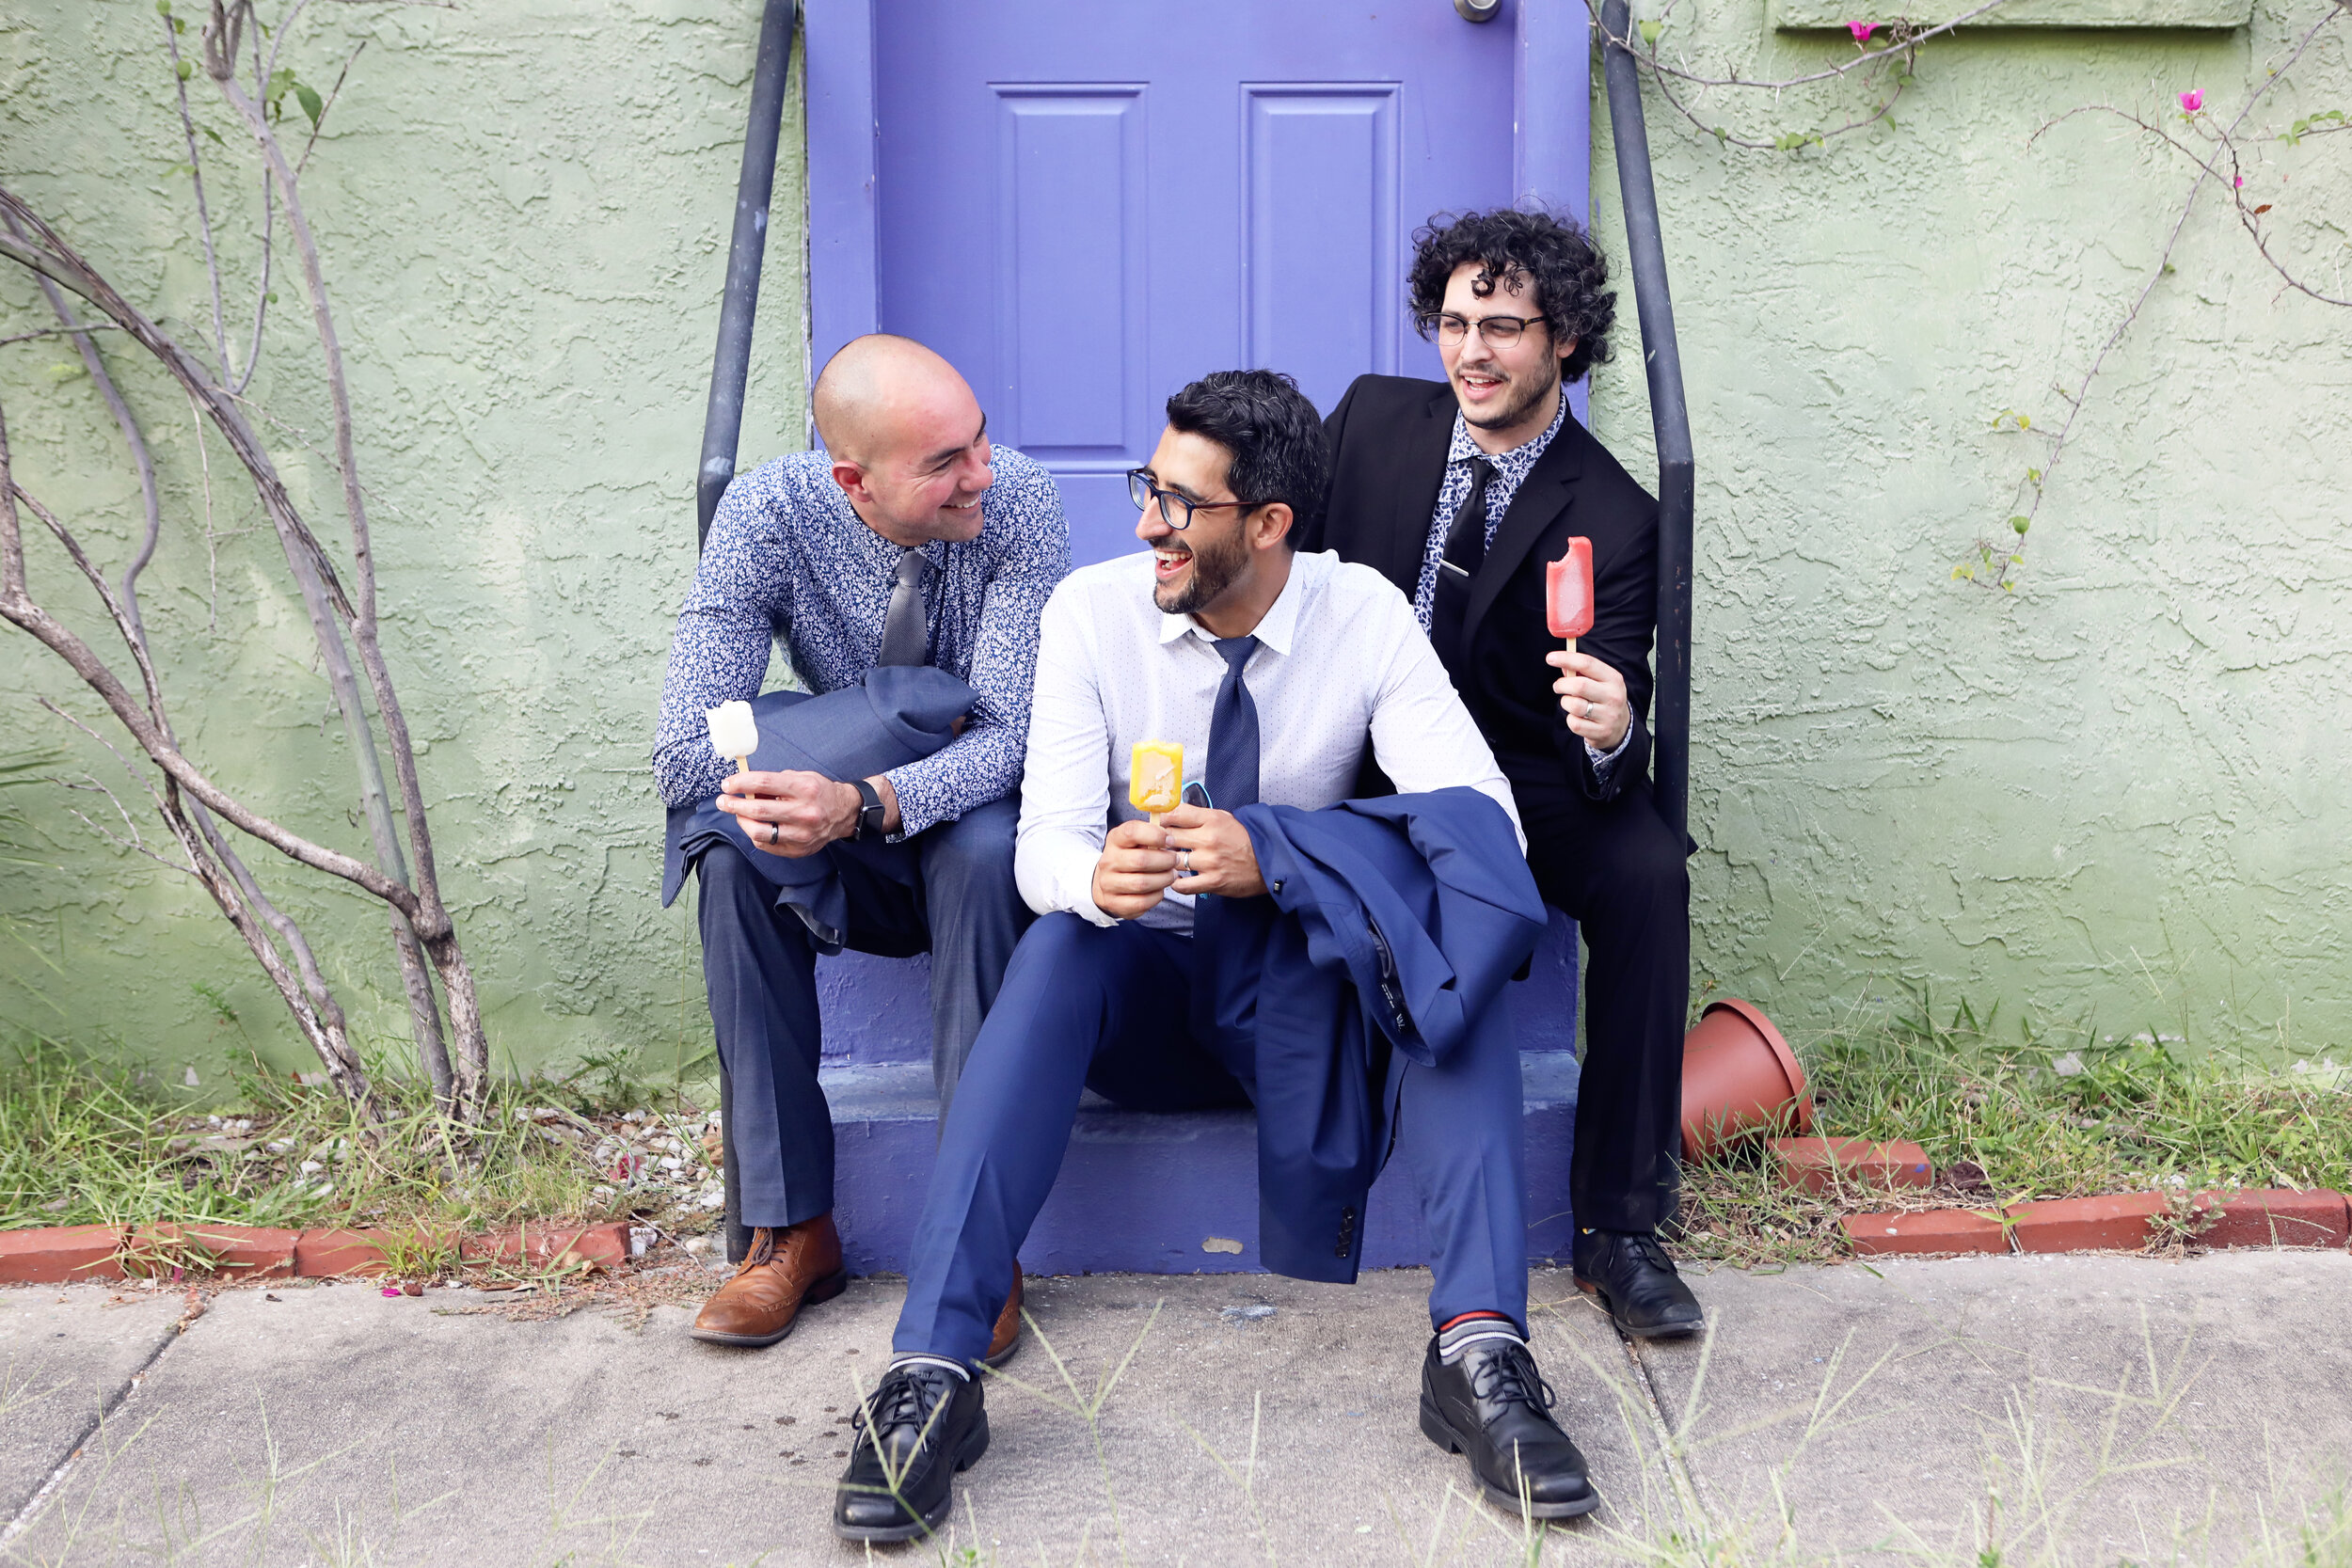 La Lucha_suits ice cream laughing_color.jpg